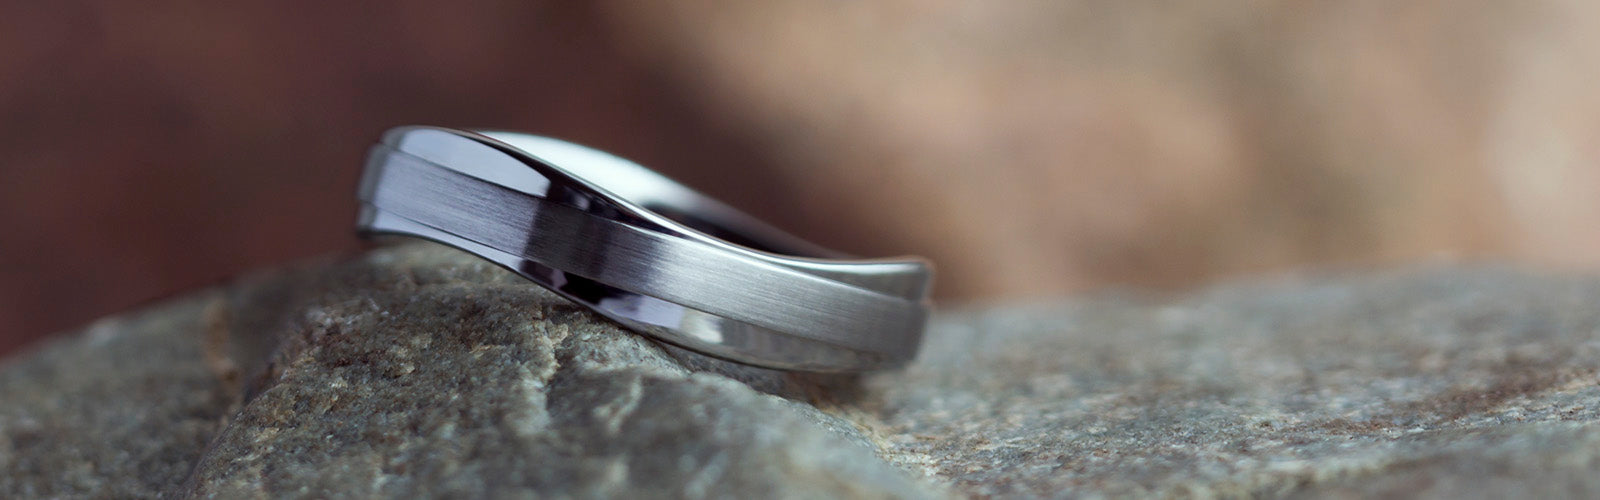 Unique, All-Metal Wedding Bands from Jewelry by Johan